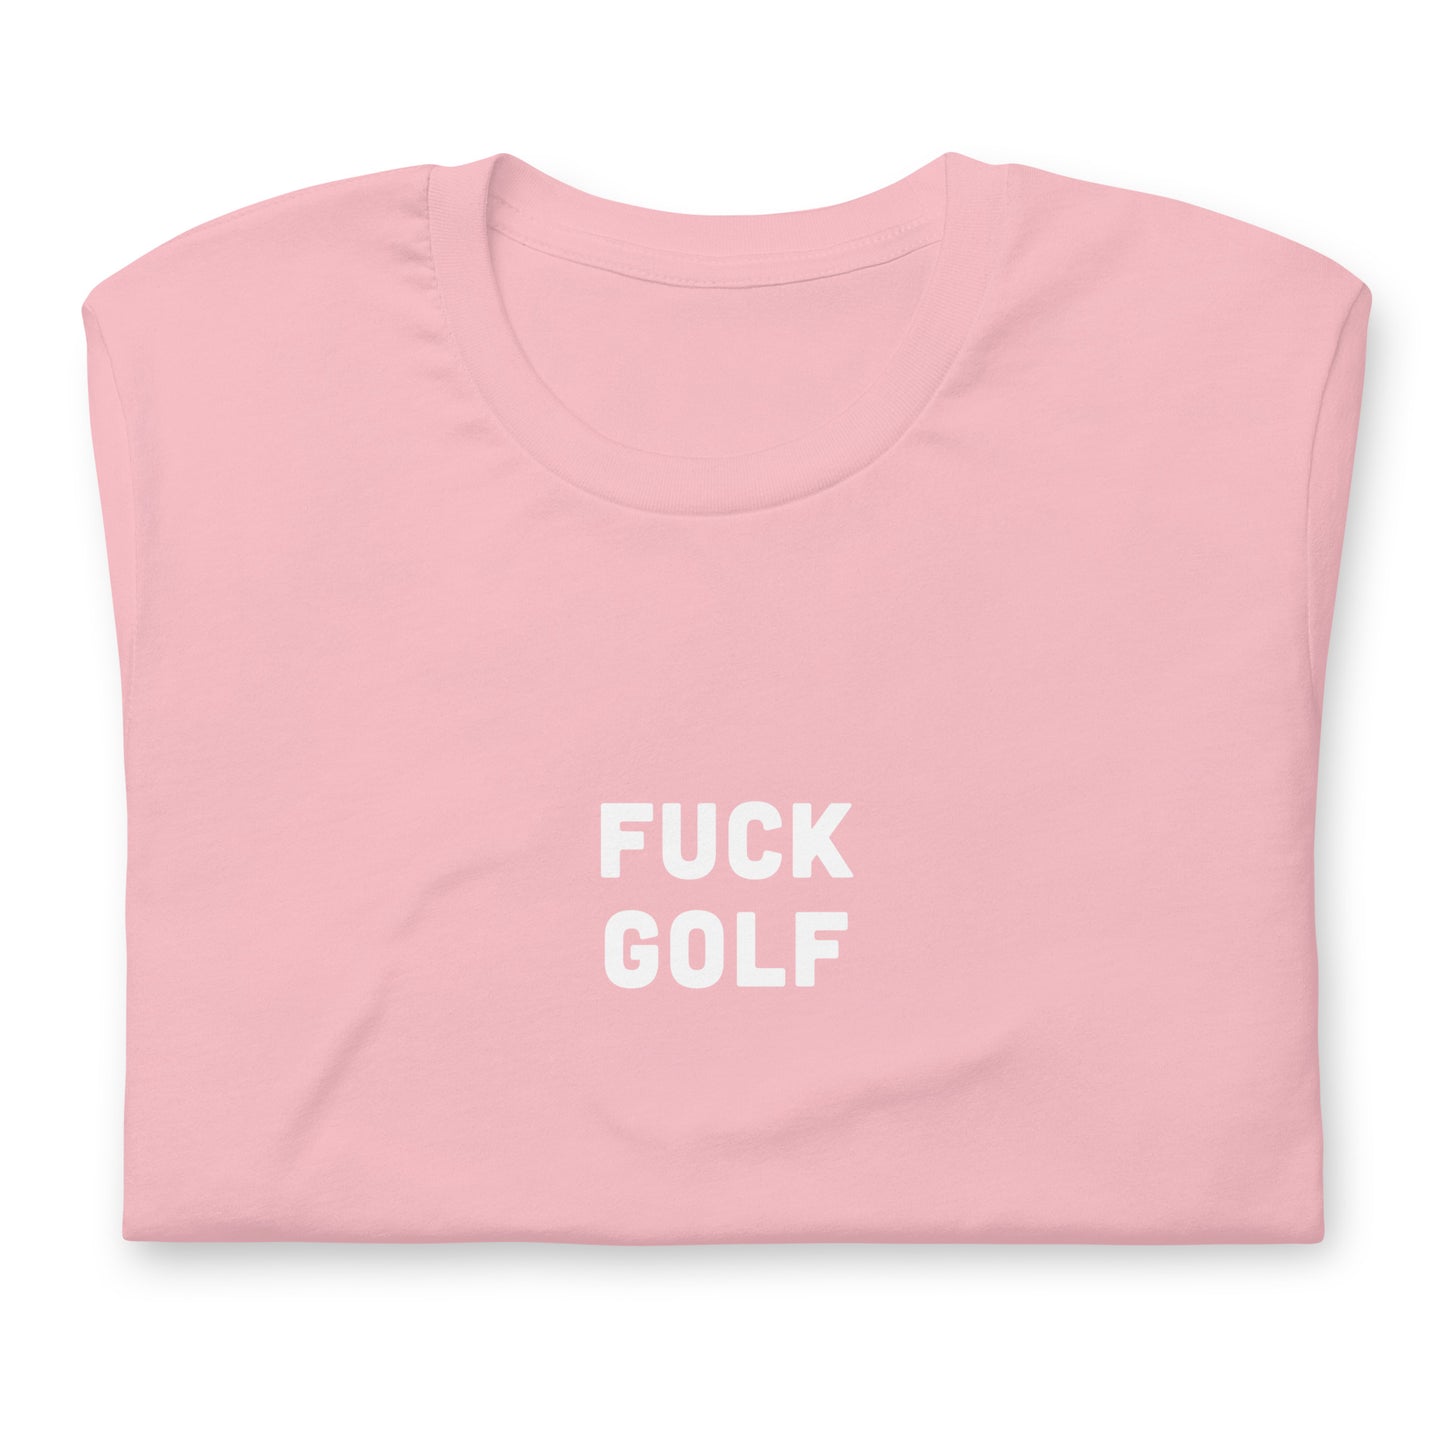 Fuck Golf T-Shirt Size 2XL Color Forest